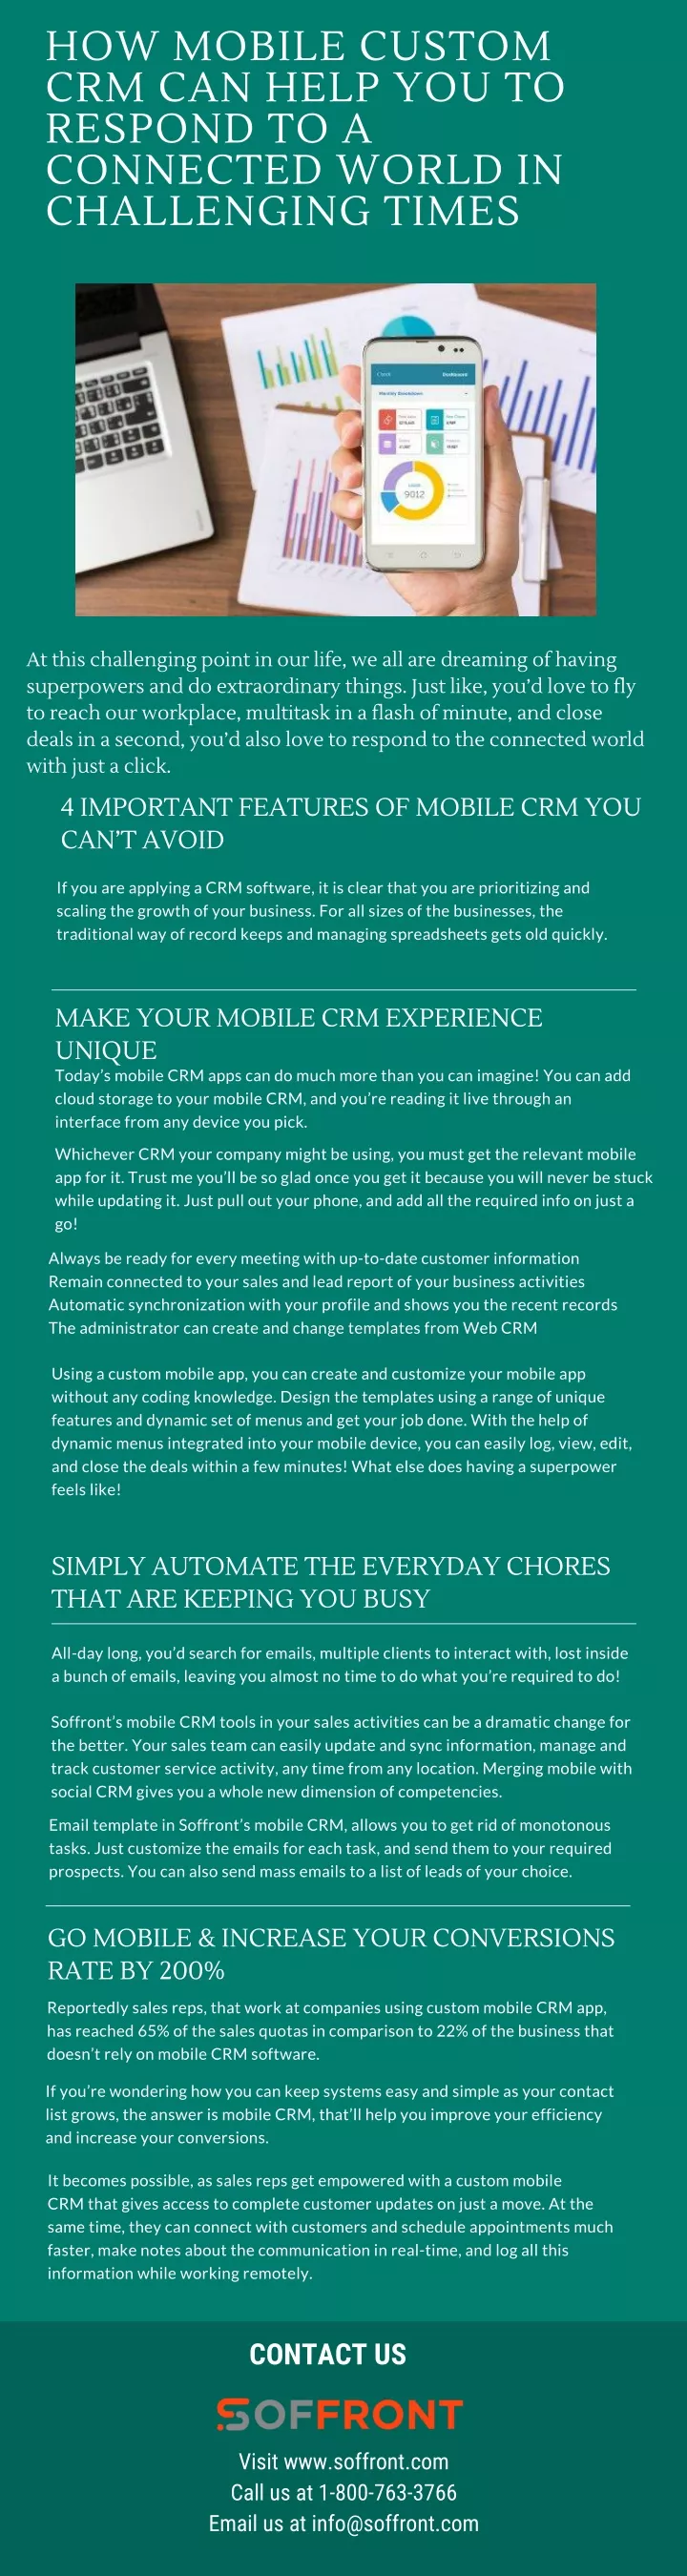 how mobile custom crm can help you to respond